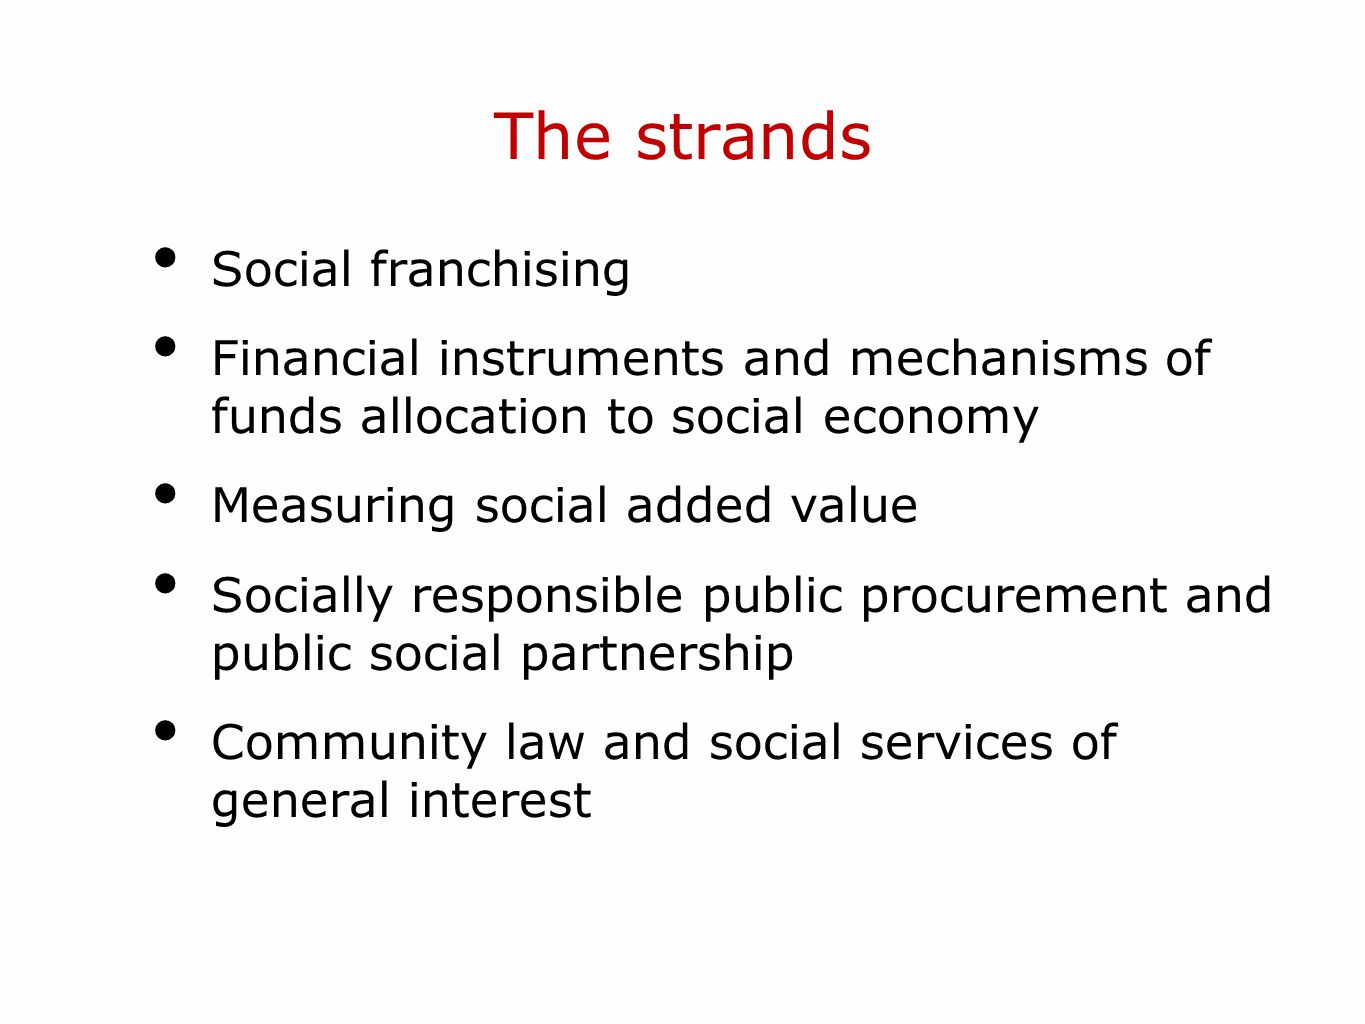 The strands Social franchising Financial instruments and mechanisms of funds allocation to social economy Measuring social added value Socially responsible public procurement and public social partnership Community law and social services of general interest